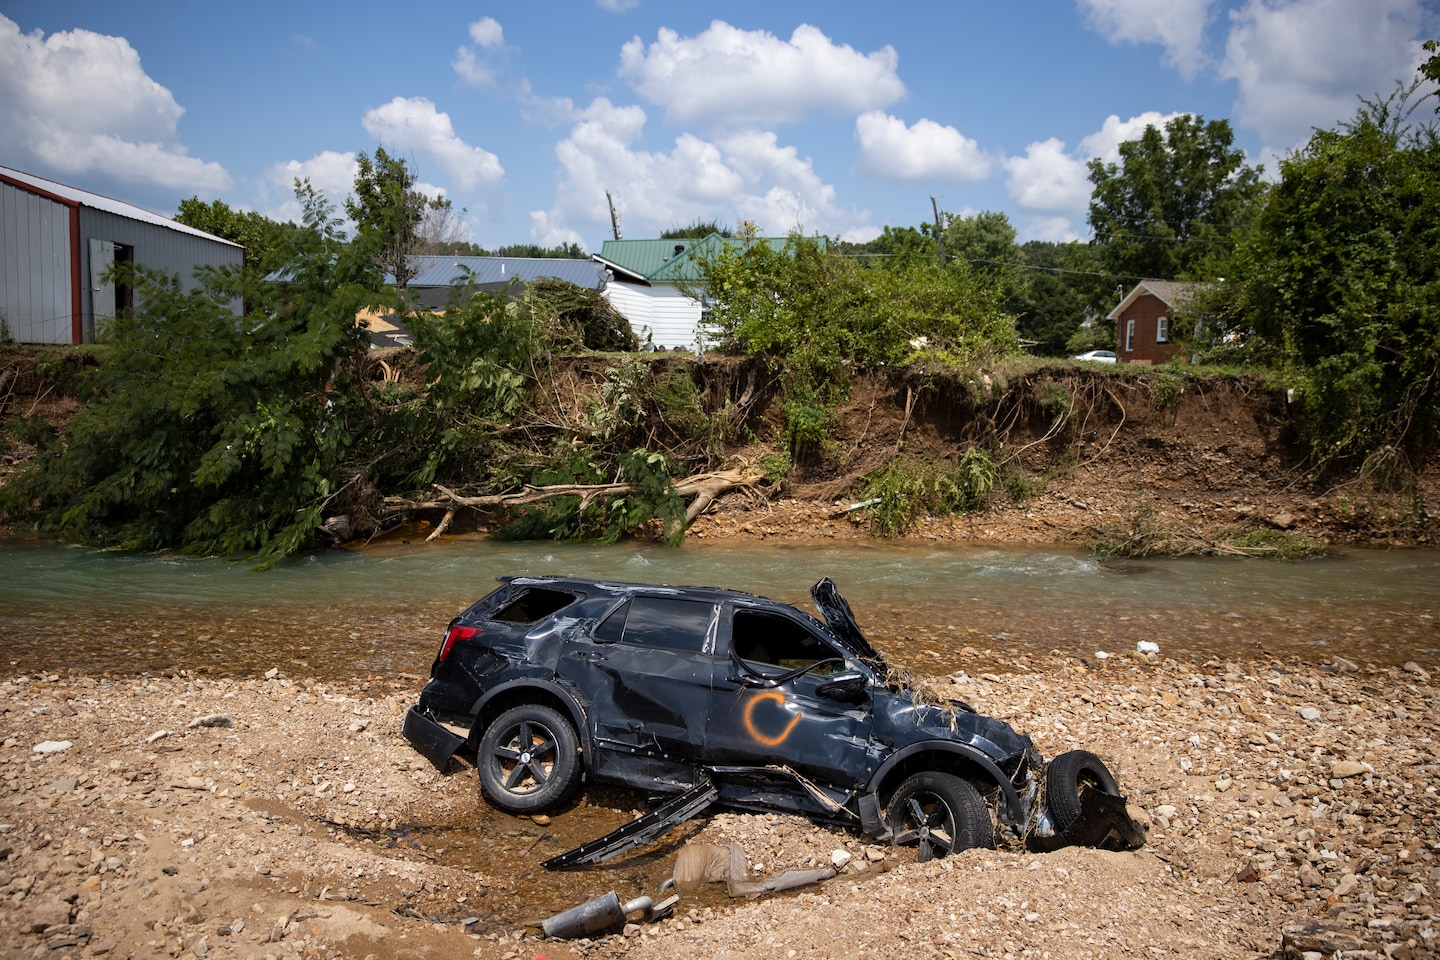 Tennessee floods show a pressing climate danger across America: A wall of water